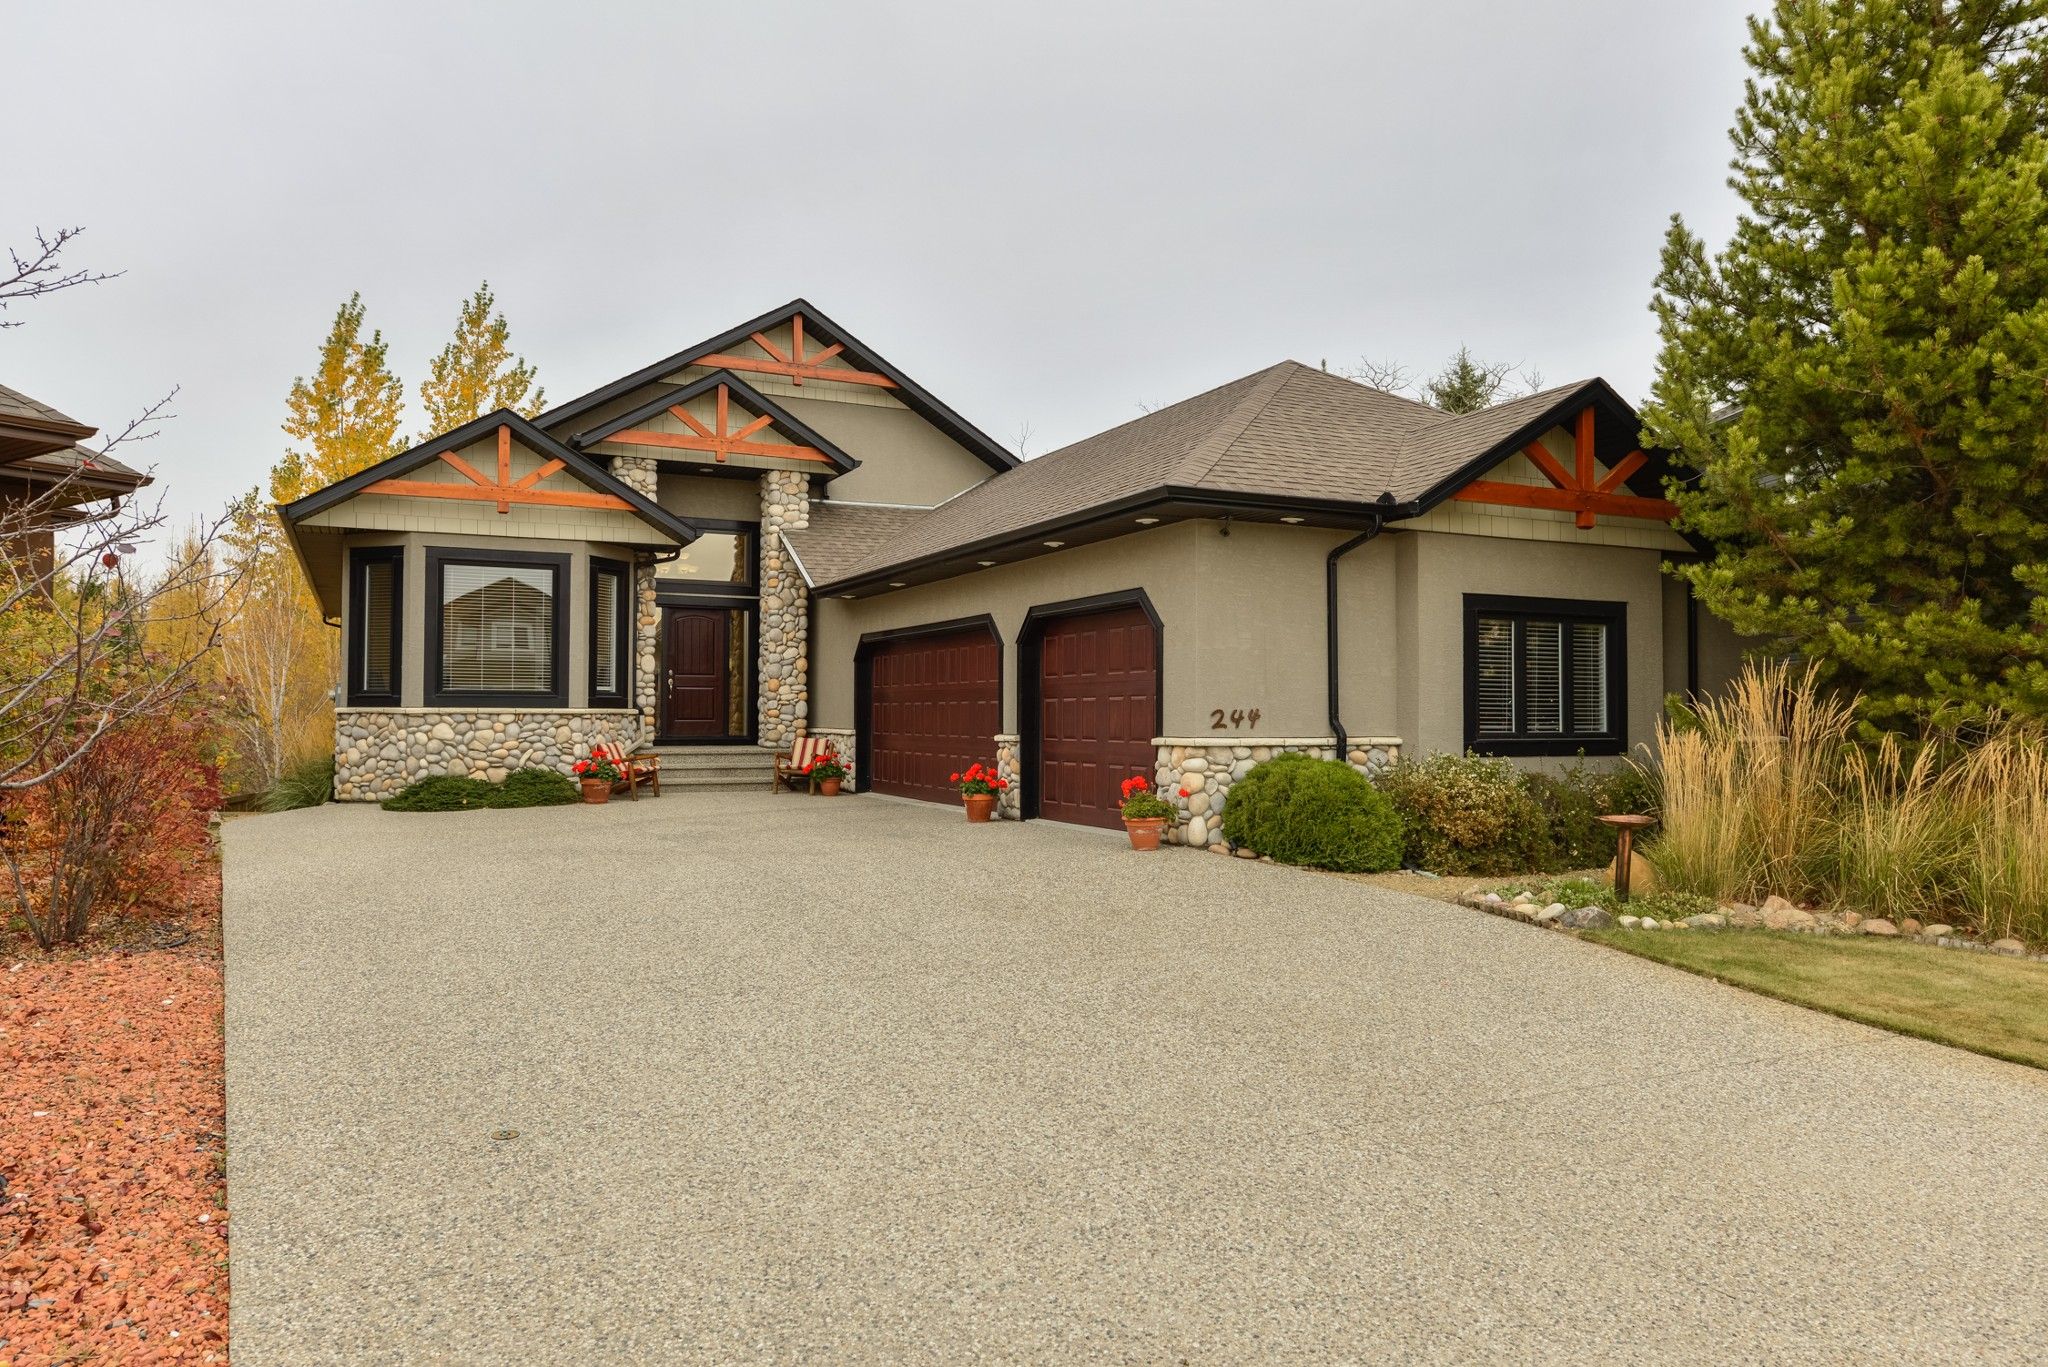 Architecturally designed with a 'Jasper' inspiration. Exterior finishings of stone, wood and acrylic. Oversized 3 car garage 23.2' x 38.8', heated with 60,000 BTU heater and dehumidifier. 30 year shingles. Exposed aggregate driveway,front steps and back p